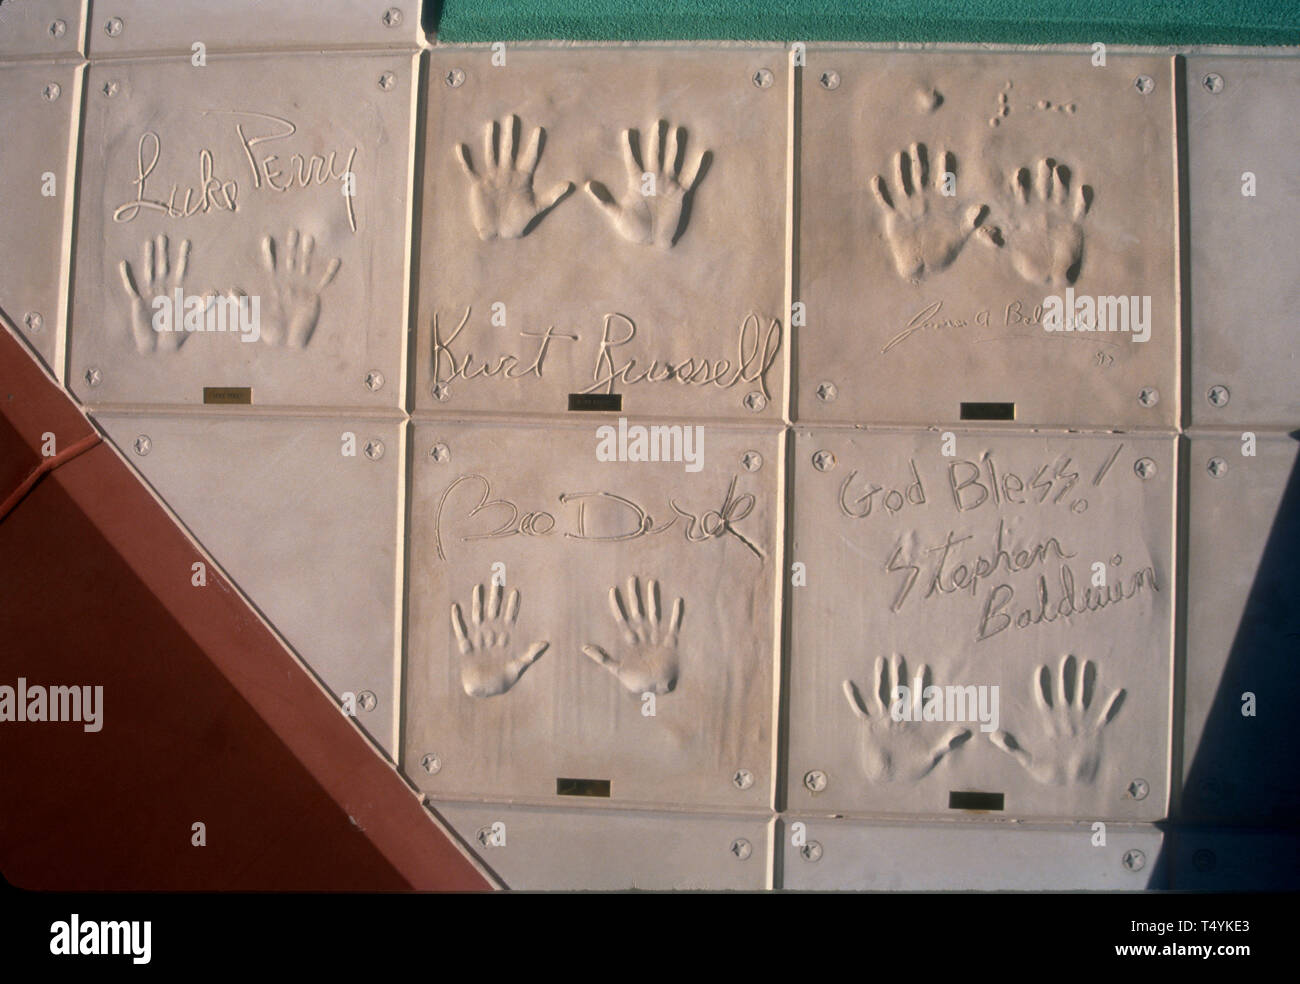 Phoenix, Arizona, USA 27th March 1994  A general view of atmosphere of handprints of Luke Perry, Bo Derek, Stephen Baldwin and Kurt Russell on display at Grand Opening of Planet Hollywood Phoenix on March 27, 1994 in Phoenix, Arizona, USA. Photo by Barry King/Alamy Stock Photo Stock Photo